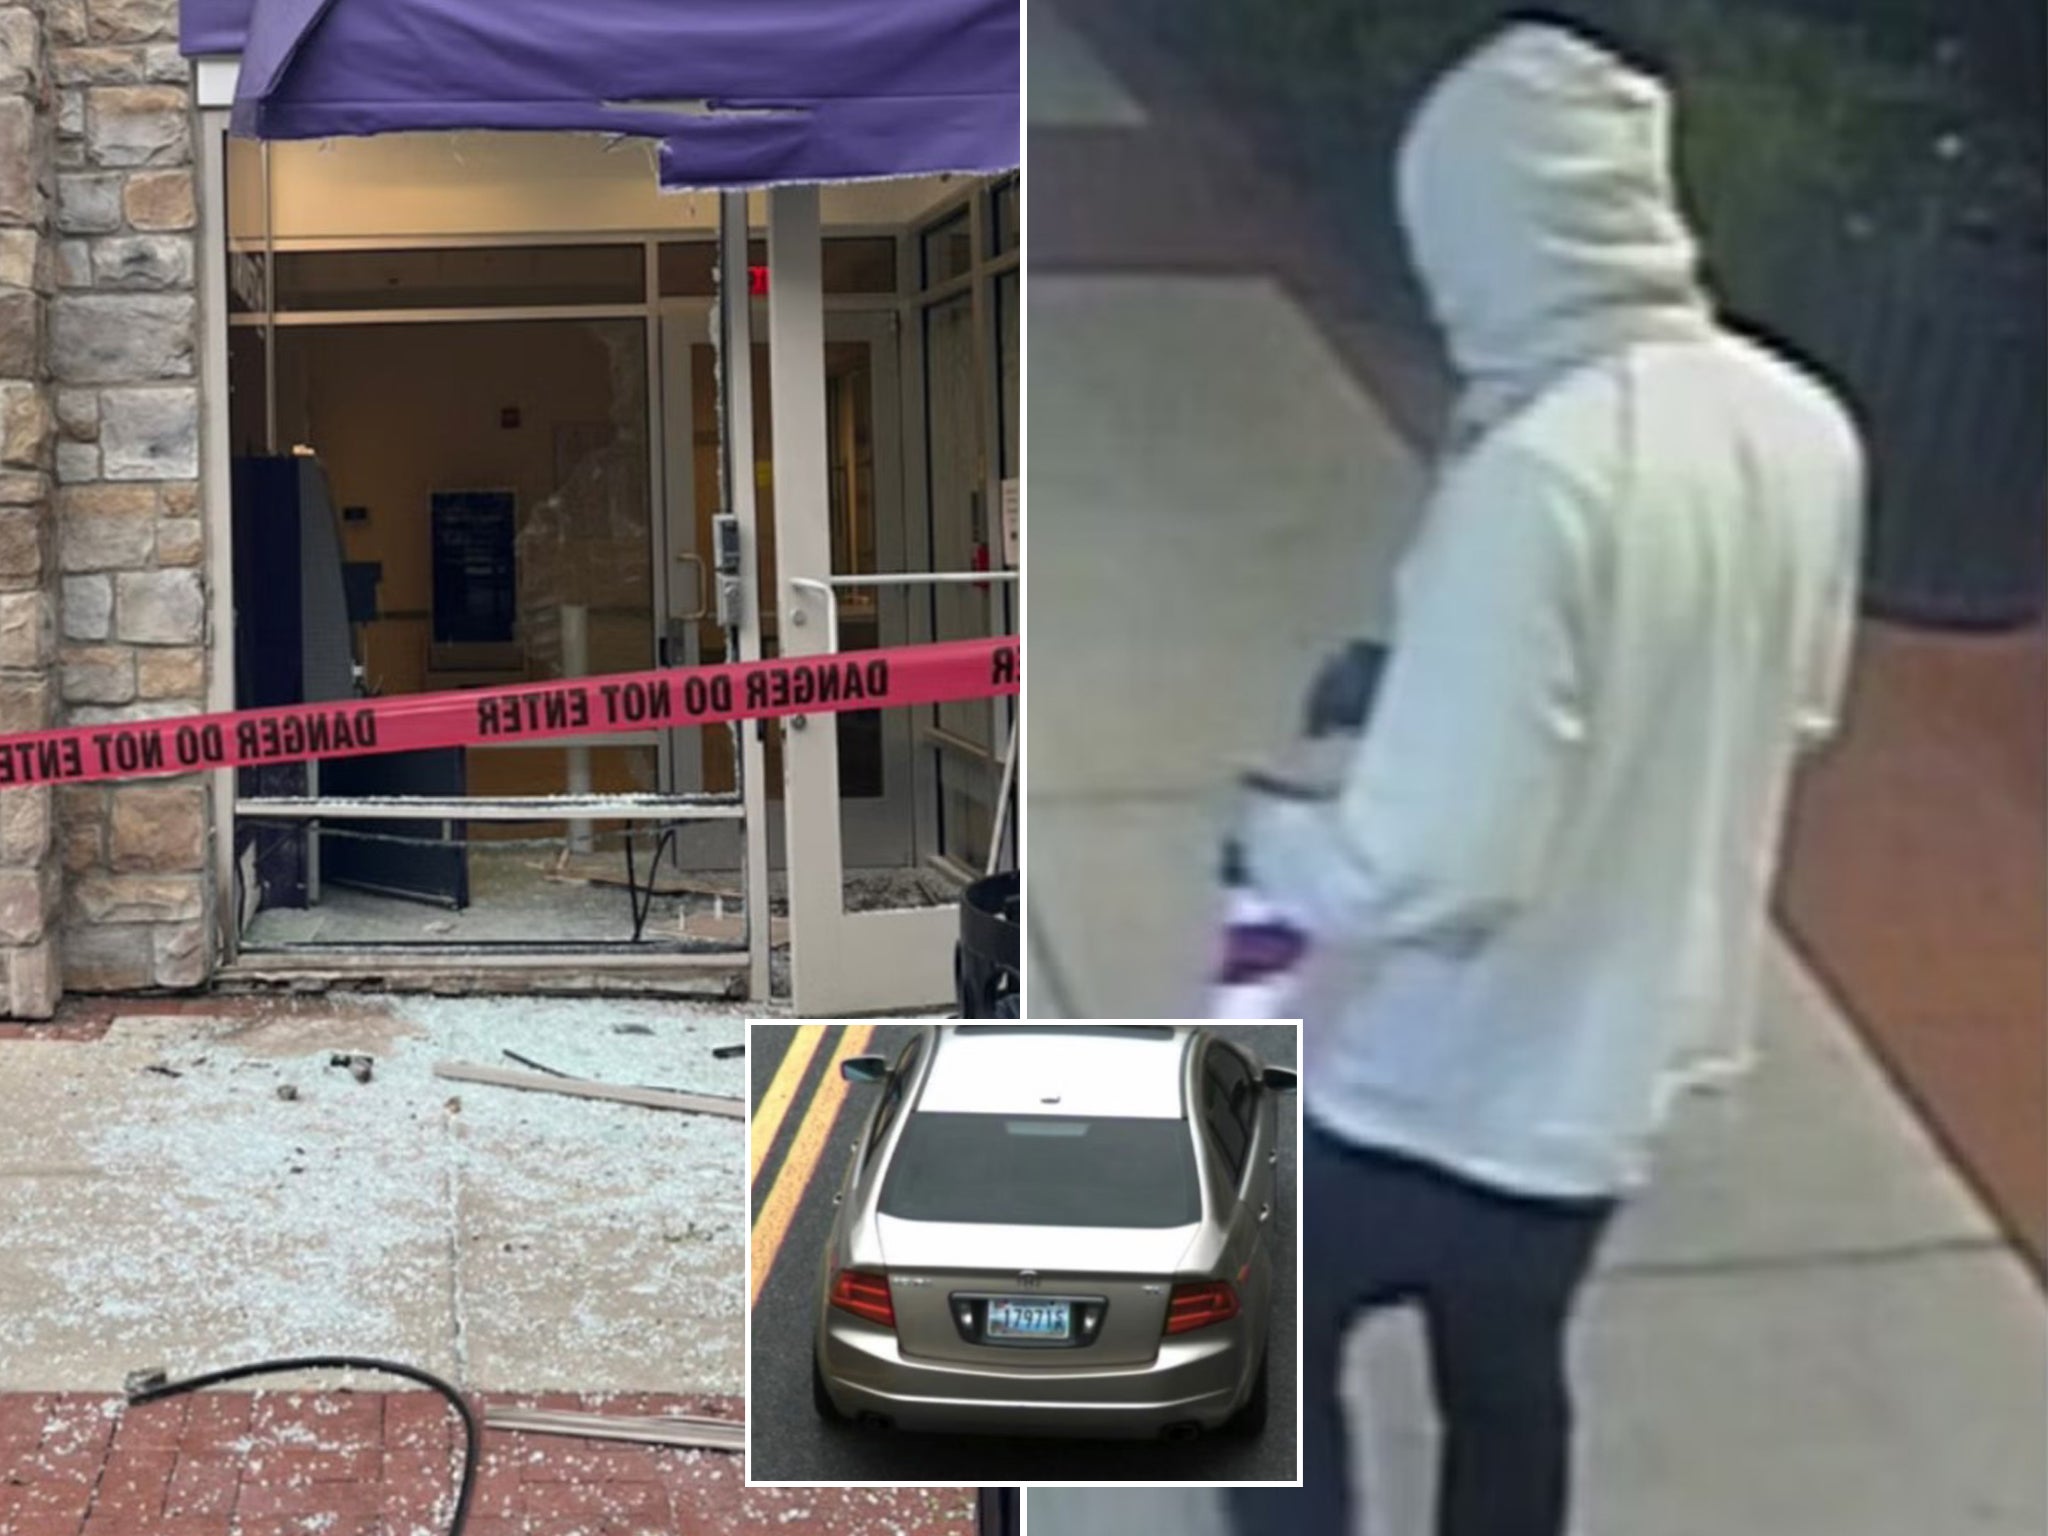 One of the damaged businesses (left), the suspect (right) and suspect vehicle (inset)